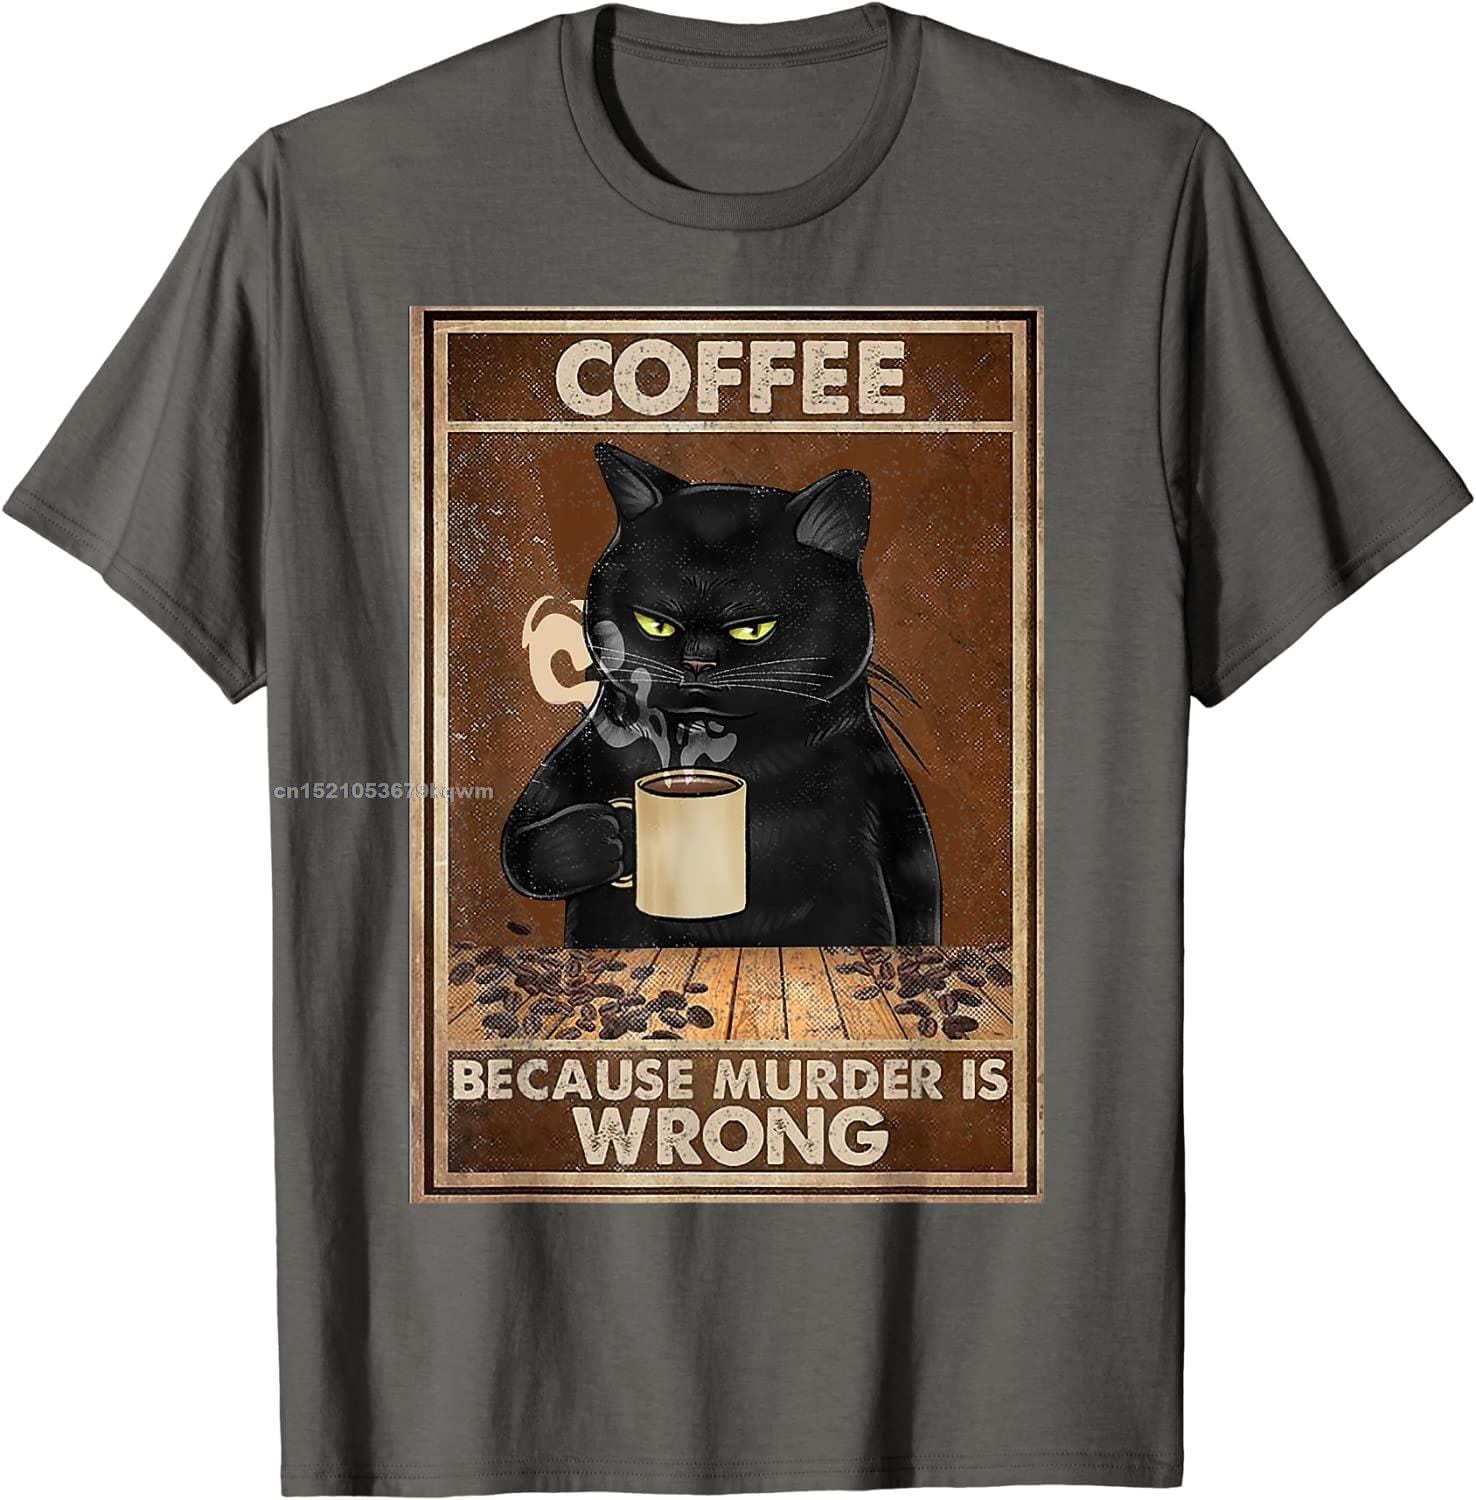 Trendy t-shirt featuring "Black Cat and Coffee" artwork